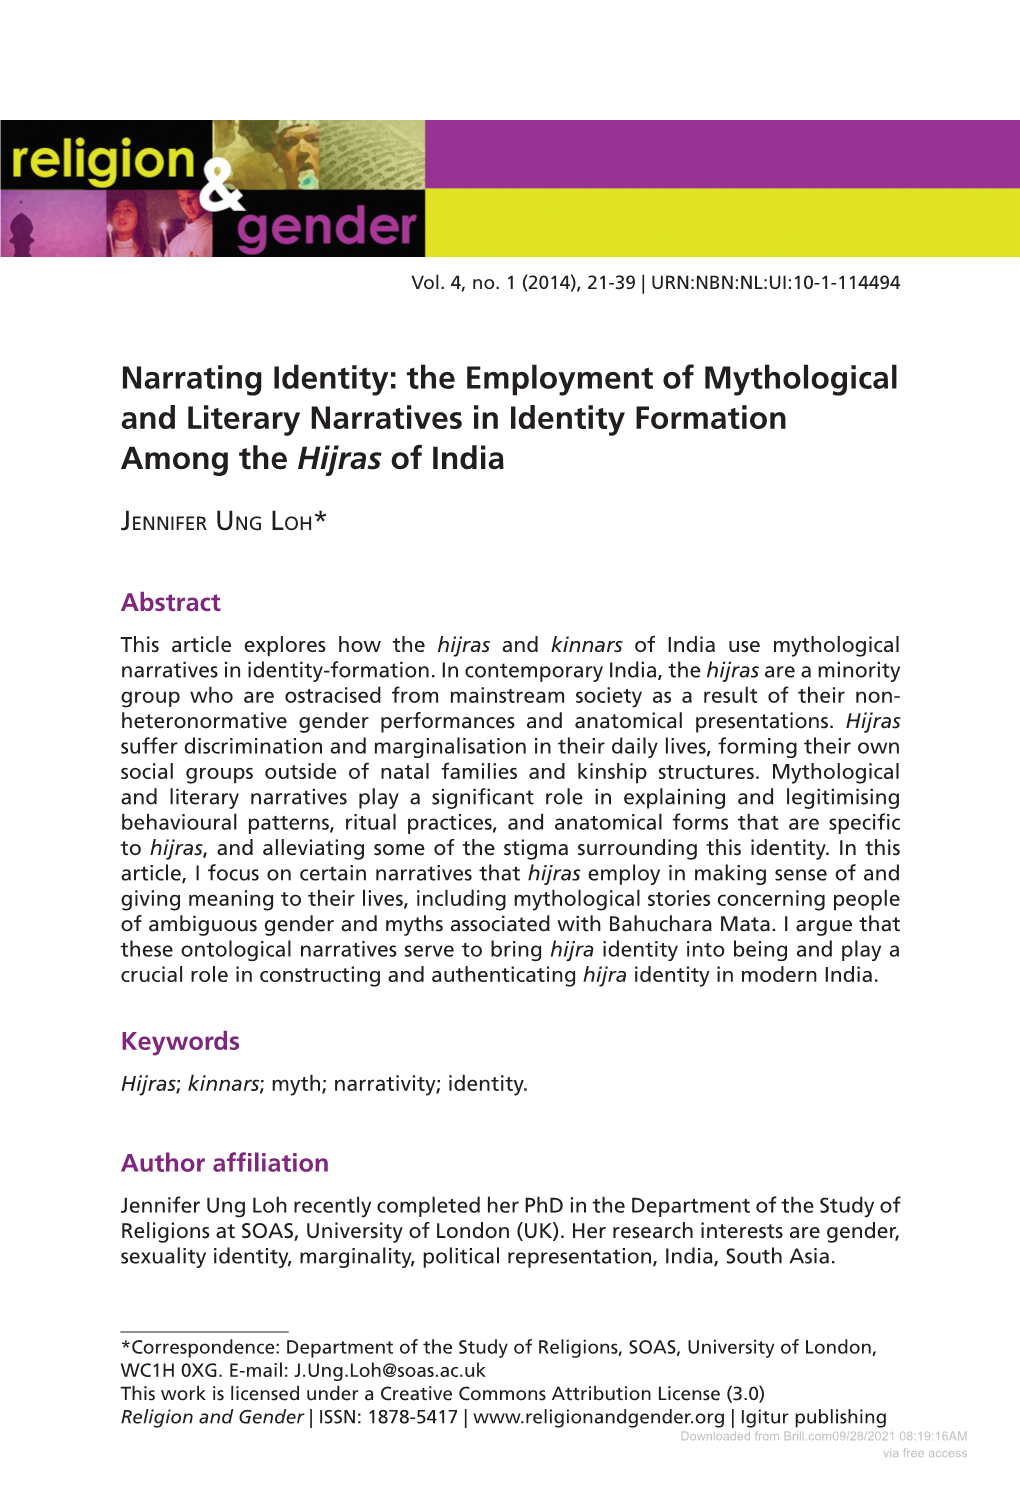 The Employment of Mythological and Literary Narratives in Identity Formation Among the Hijras of India